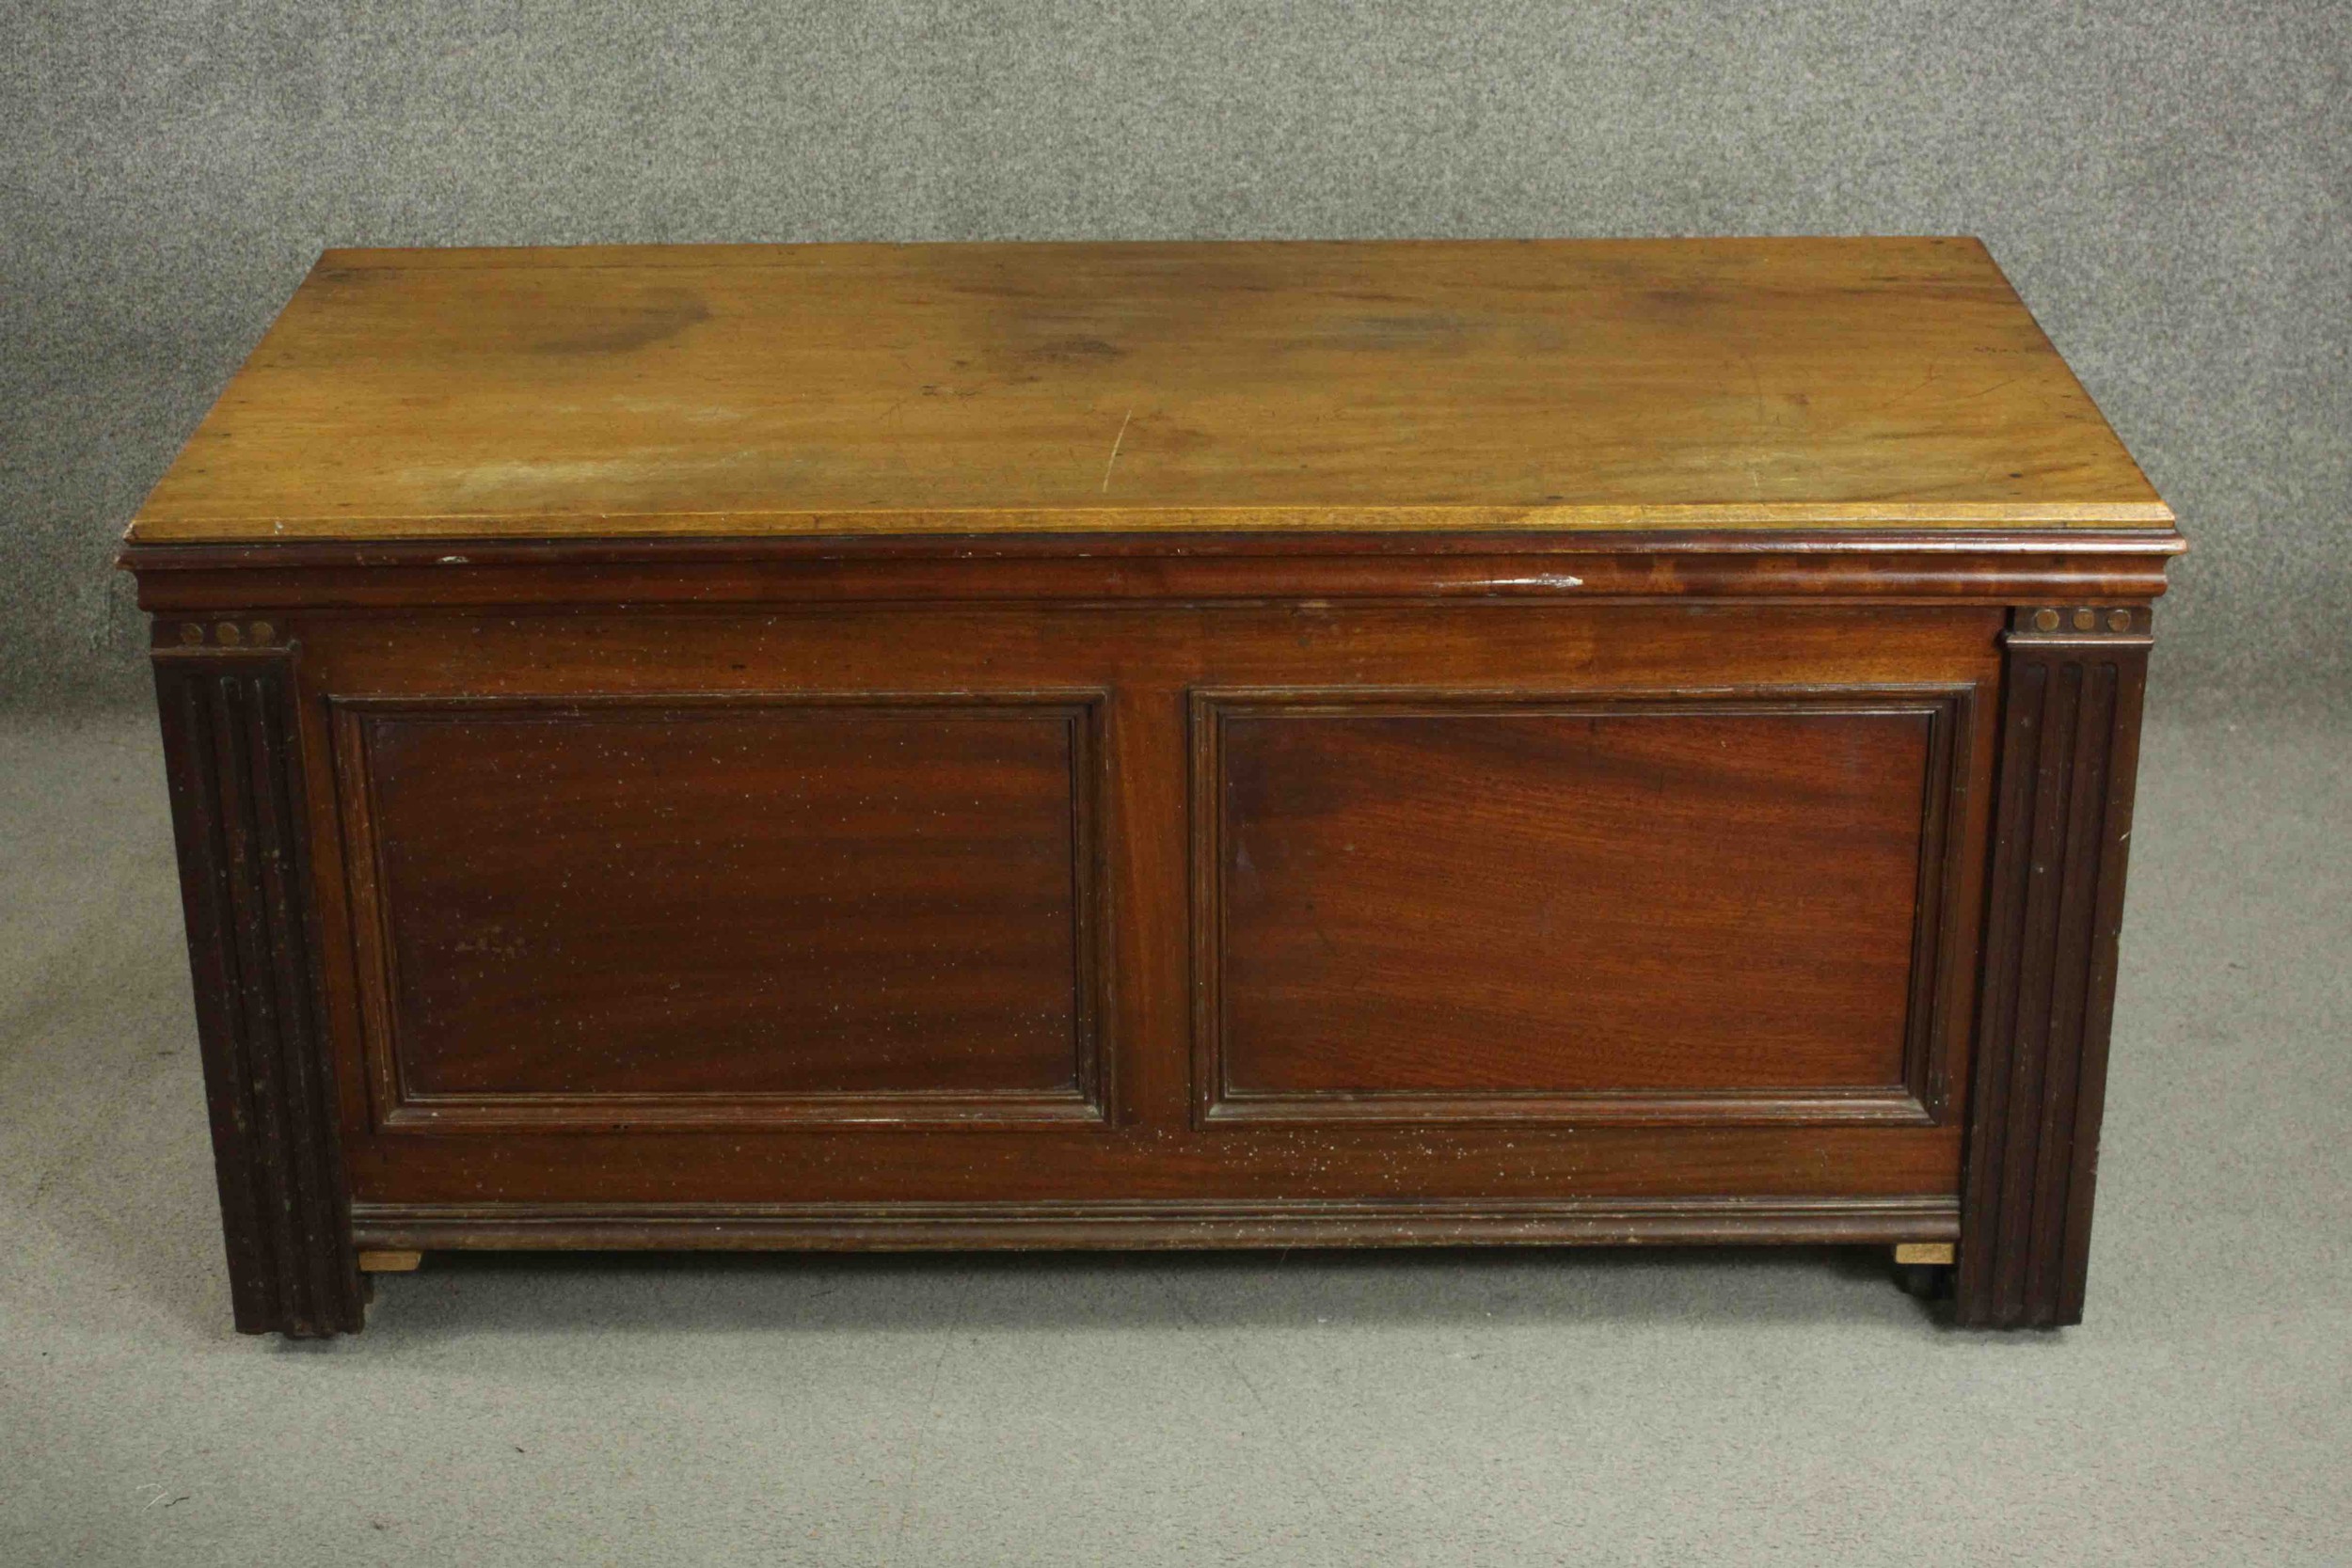 A 19th century mahogany coffer, of rectangular form, the top with a moulded edge, the panelled